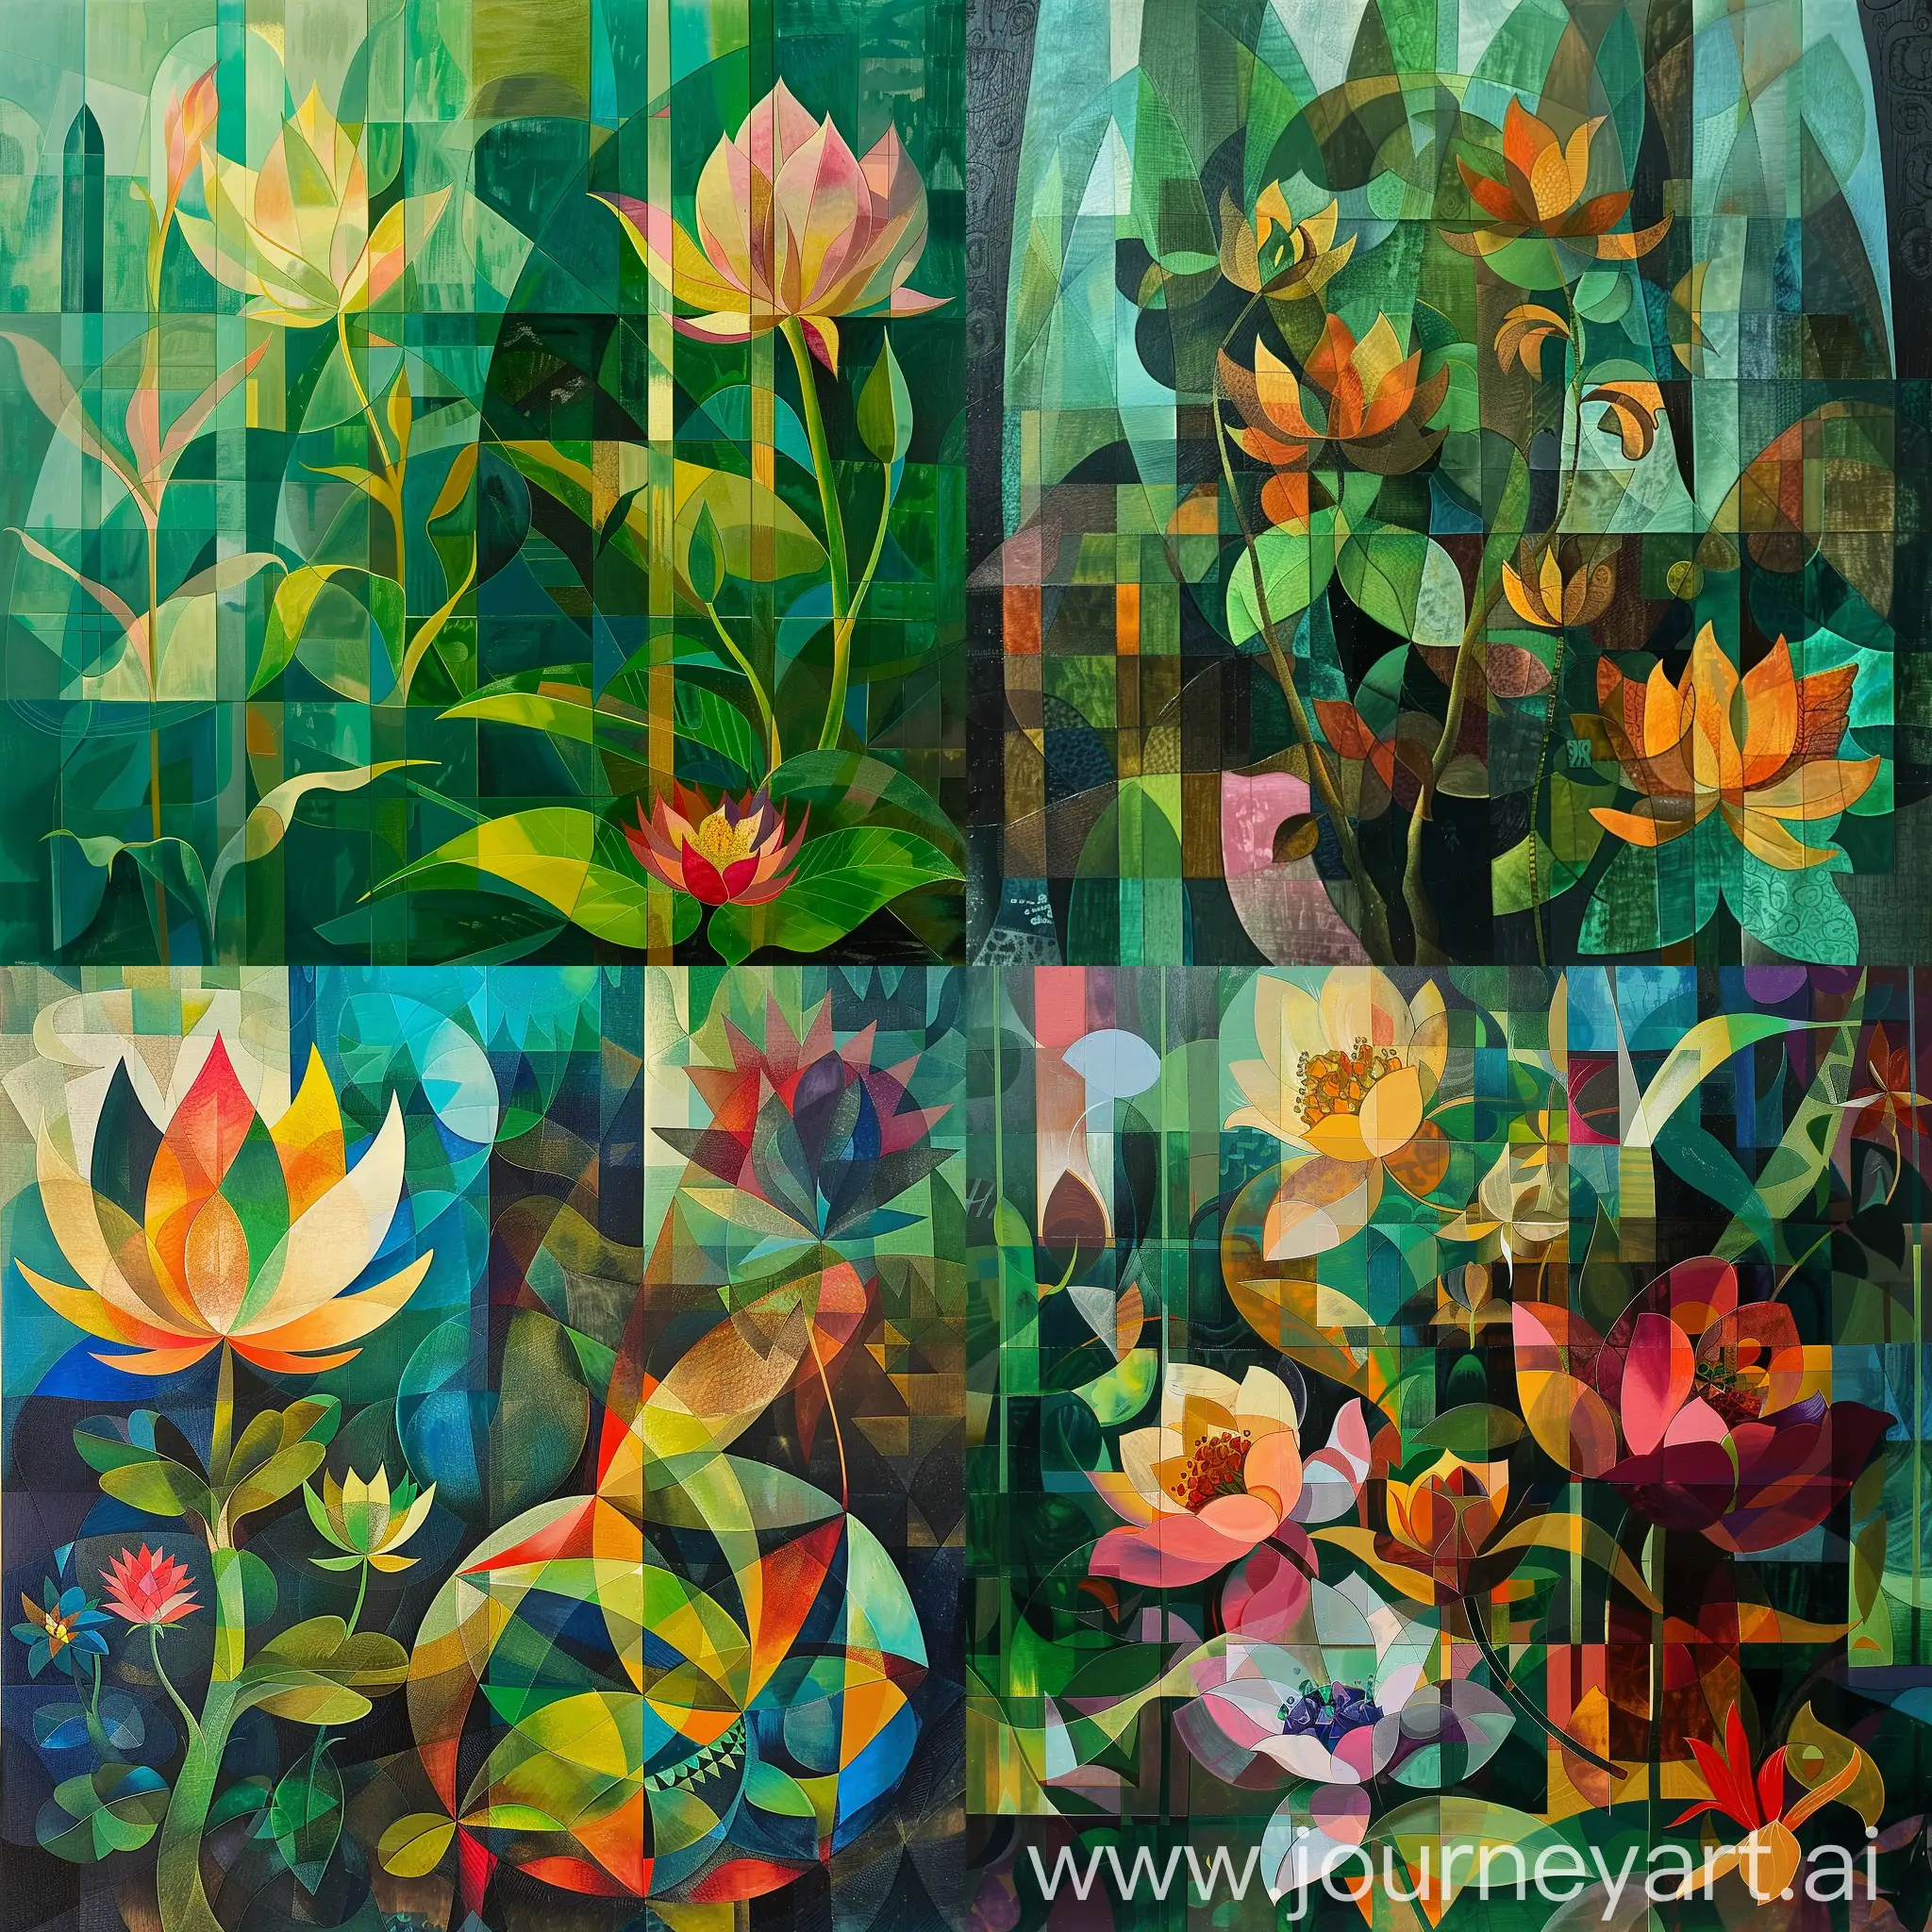 Buddhist-Thangka-Inspired-Cubist-Art-with-Futuristic-Green-Nature-and-Beautiful-Flowers